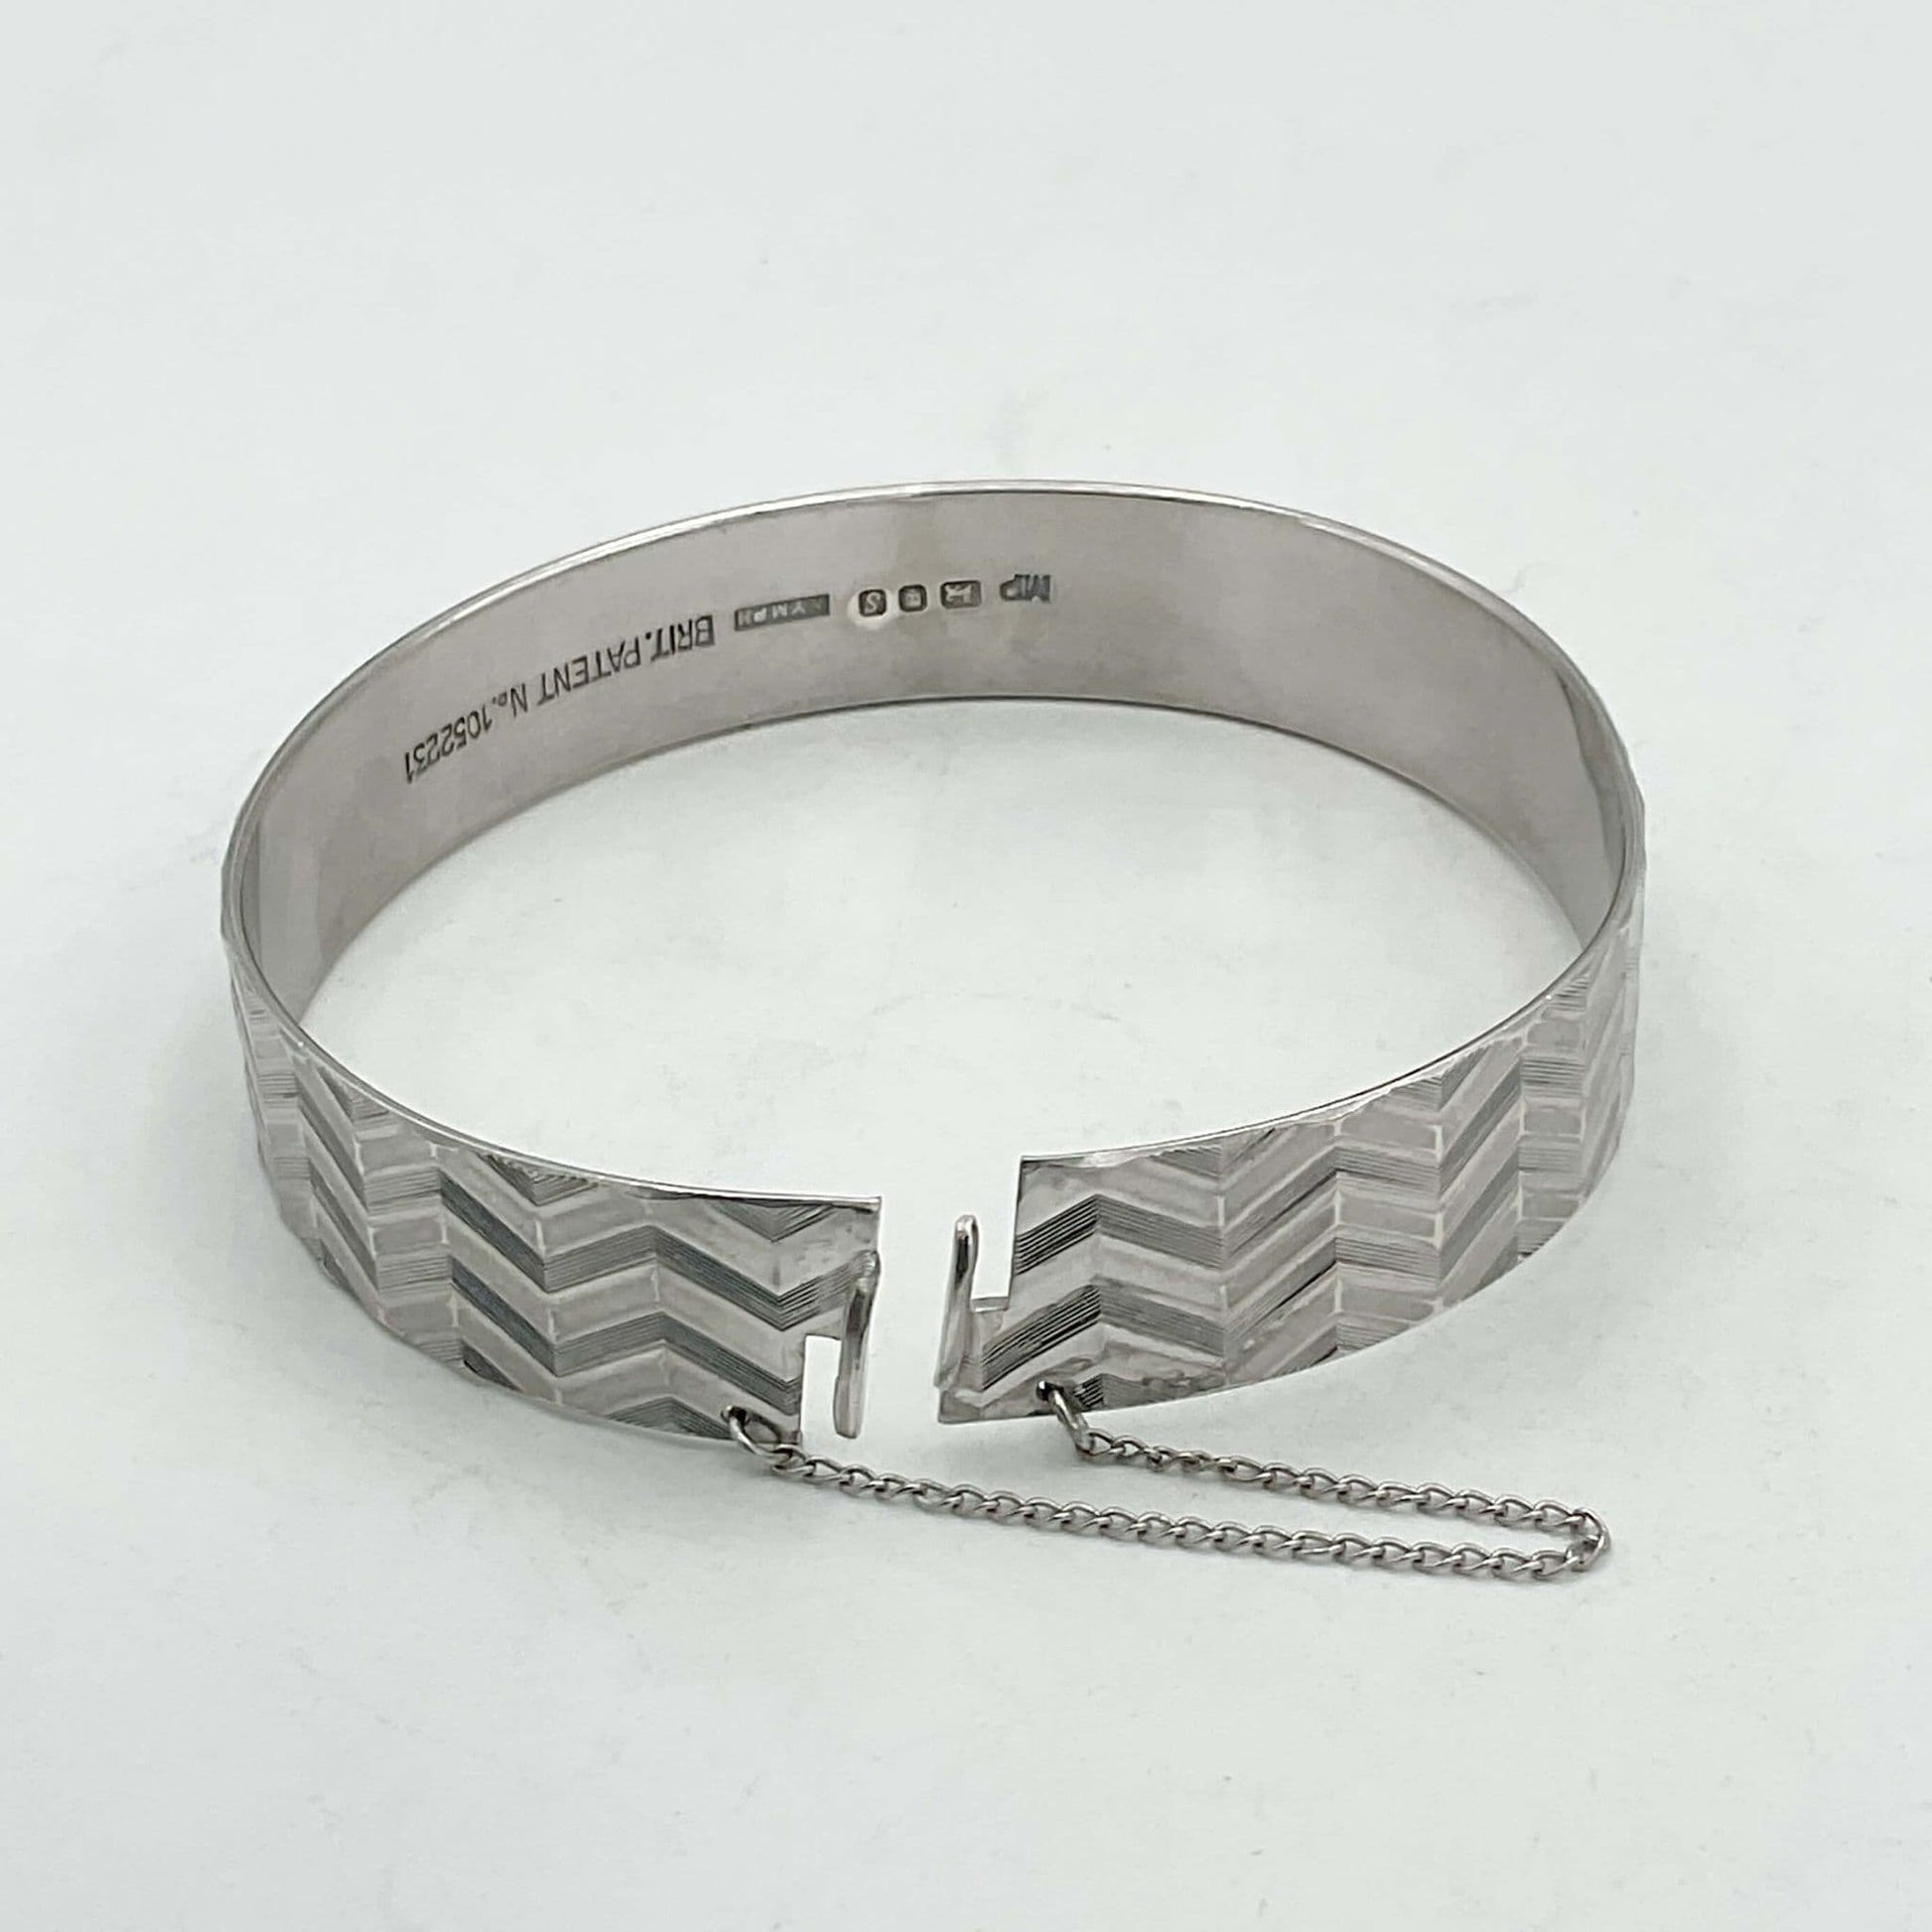 Zig zag design bracelet showing the clasp undone and safety chain